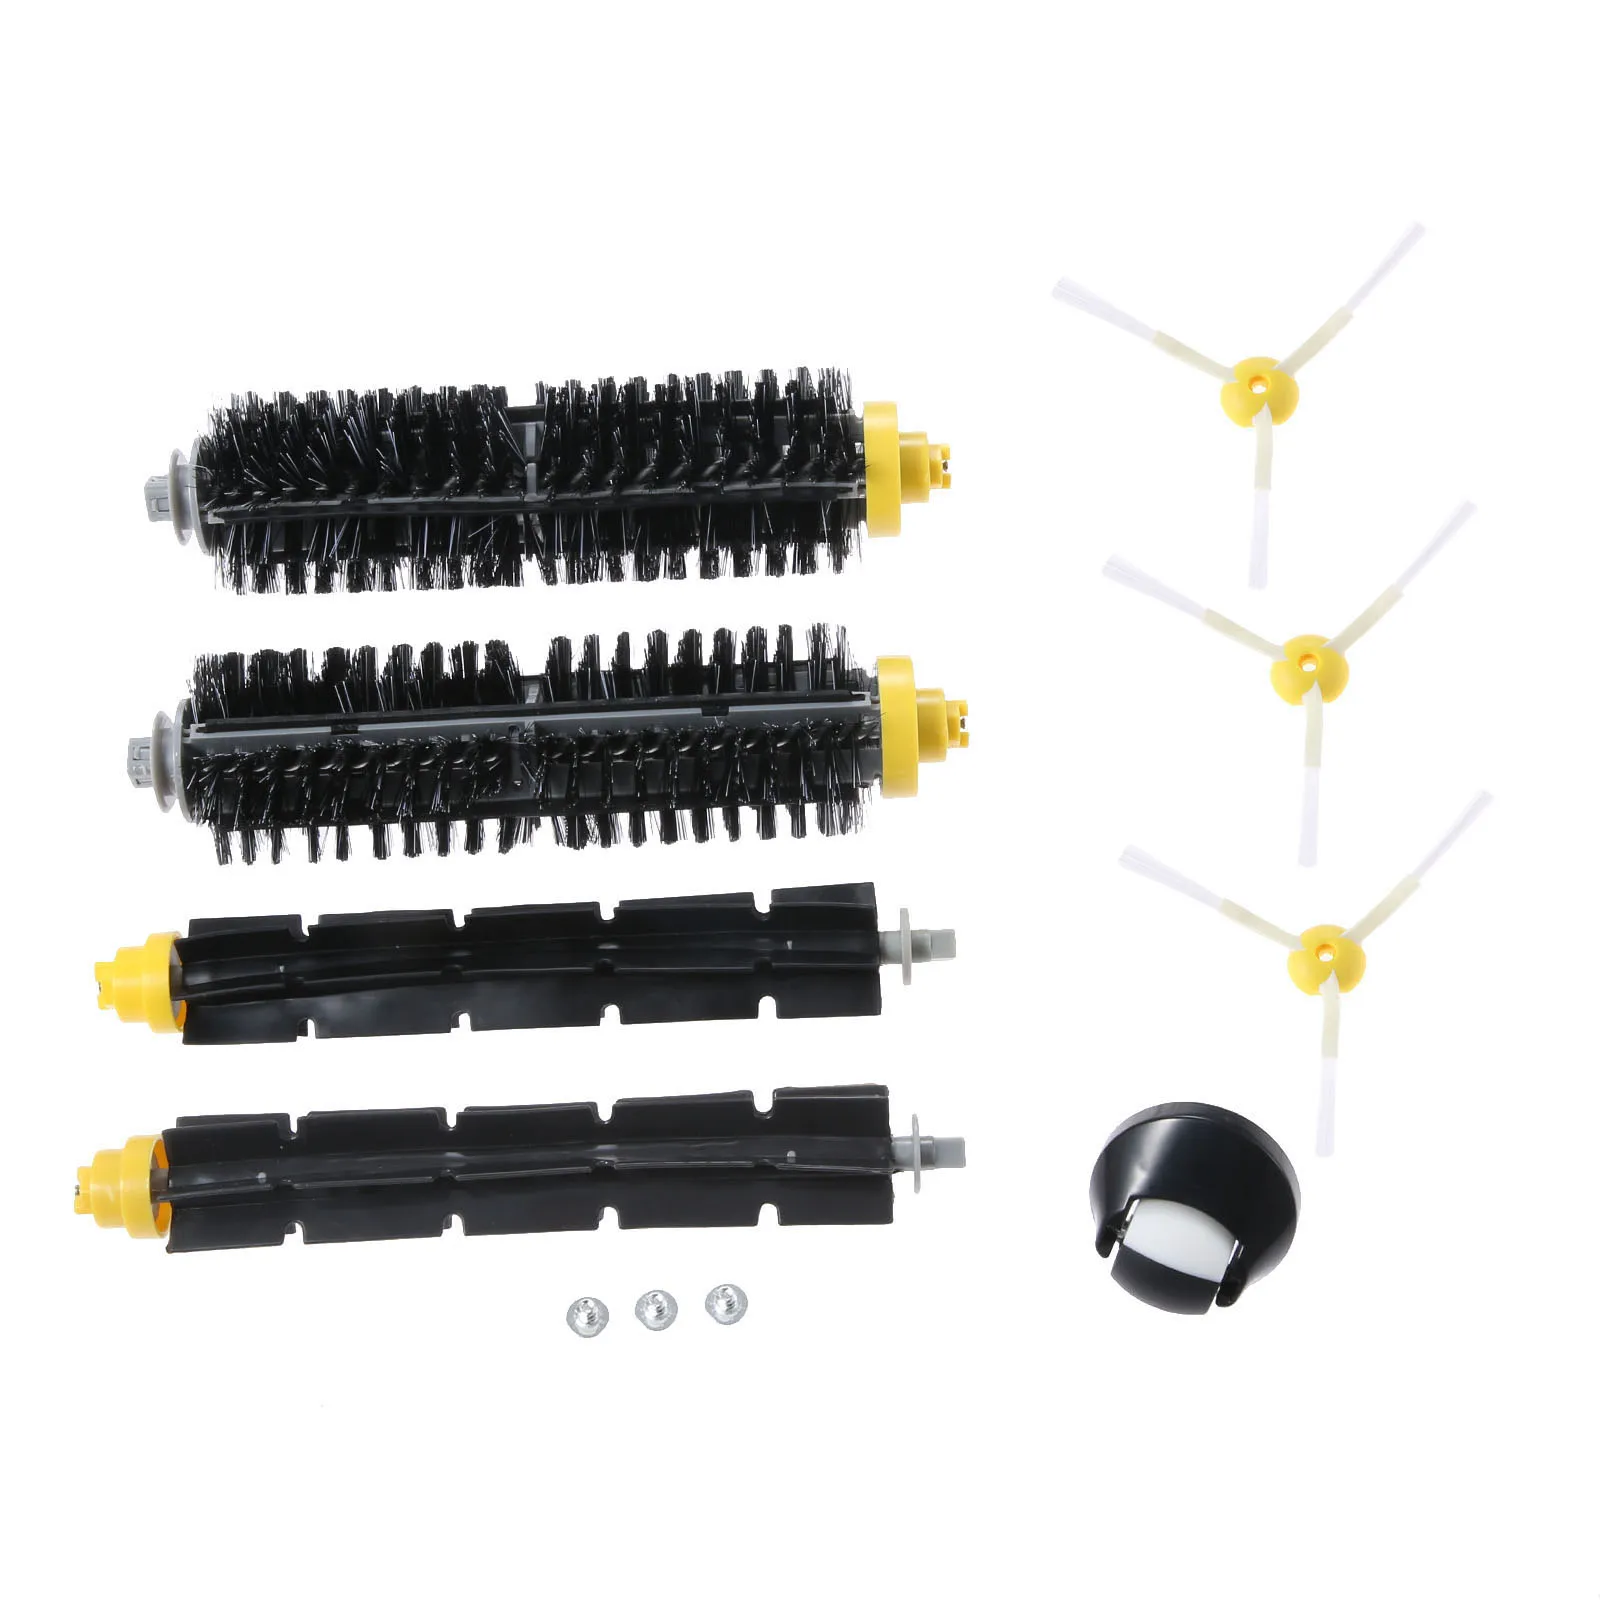 

8pcs/set Vacuum Cleaning Robots Replacement fits for 600/700 Series Bristle Brush Beater Brush 3-armed Side Brush Castor Wheel